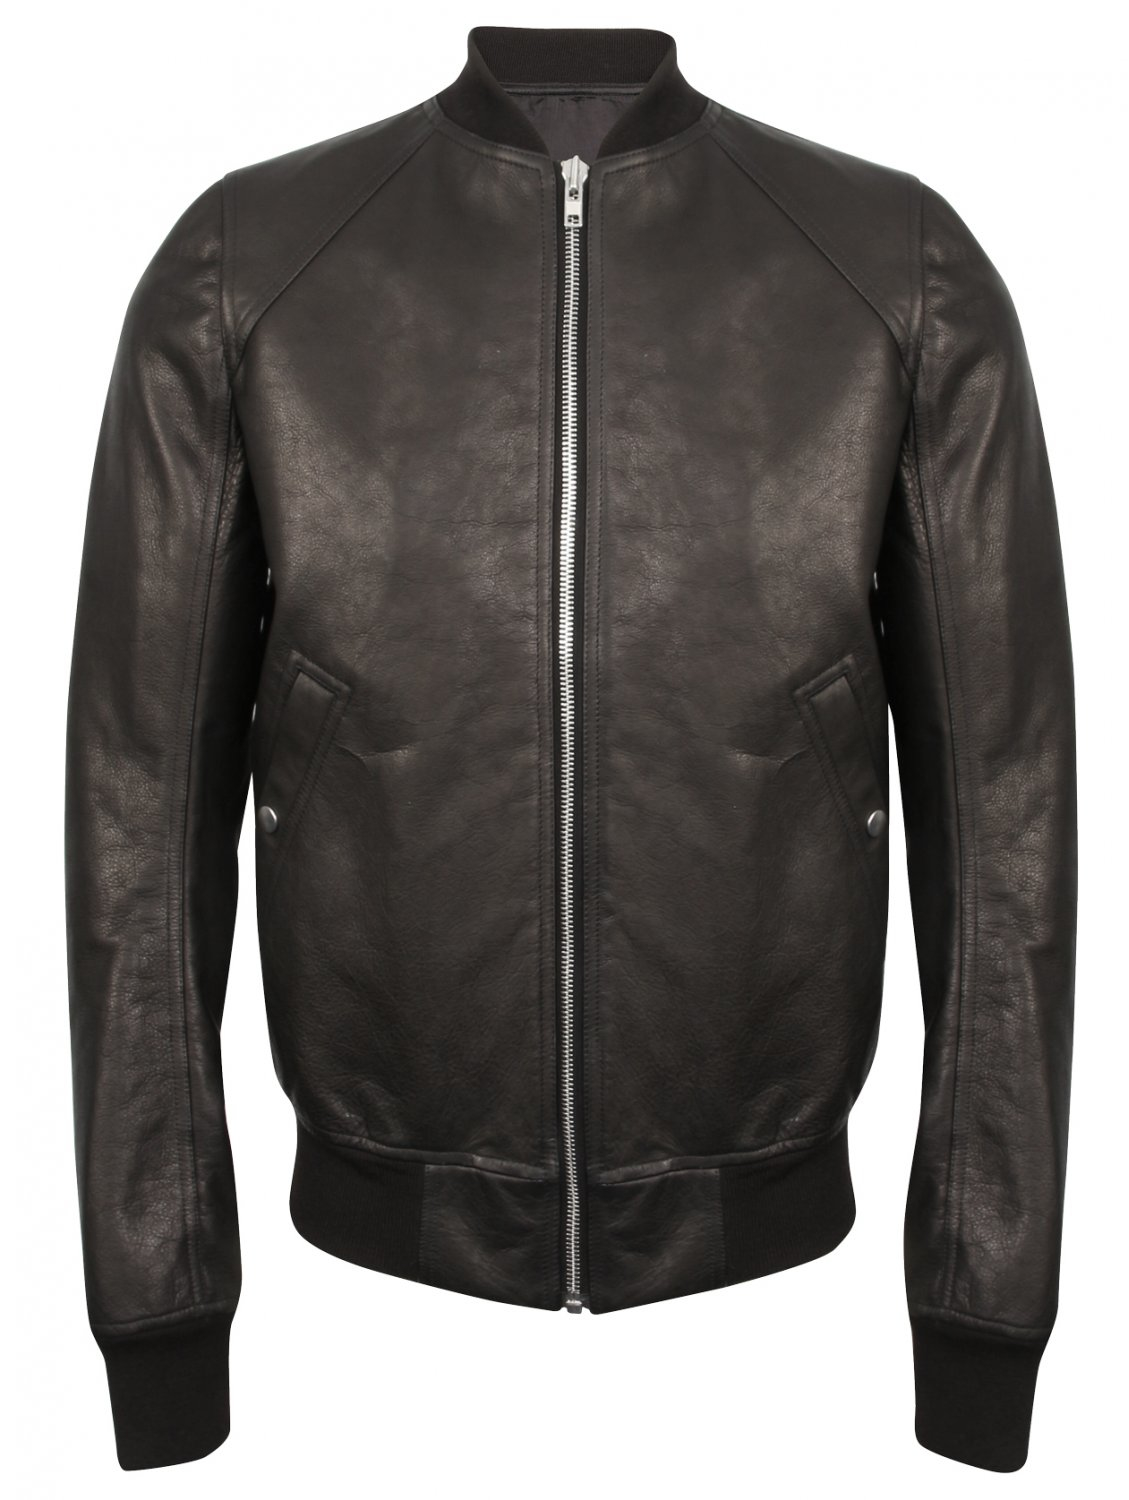 Rick Owens Cyclops Leather Bomber Jacket in Black for Men - Lyst